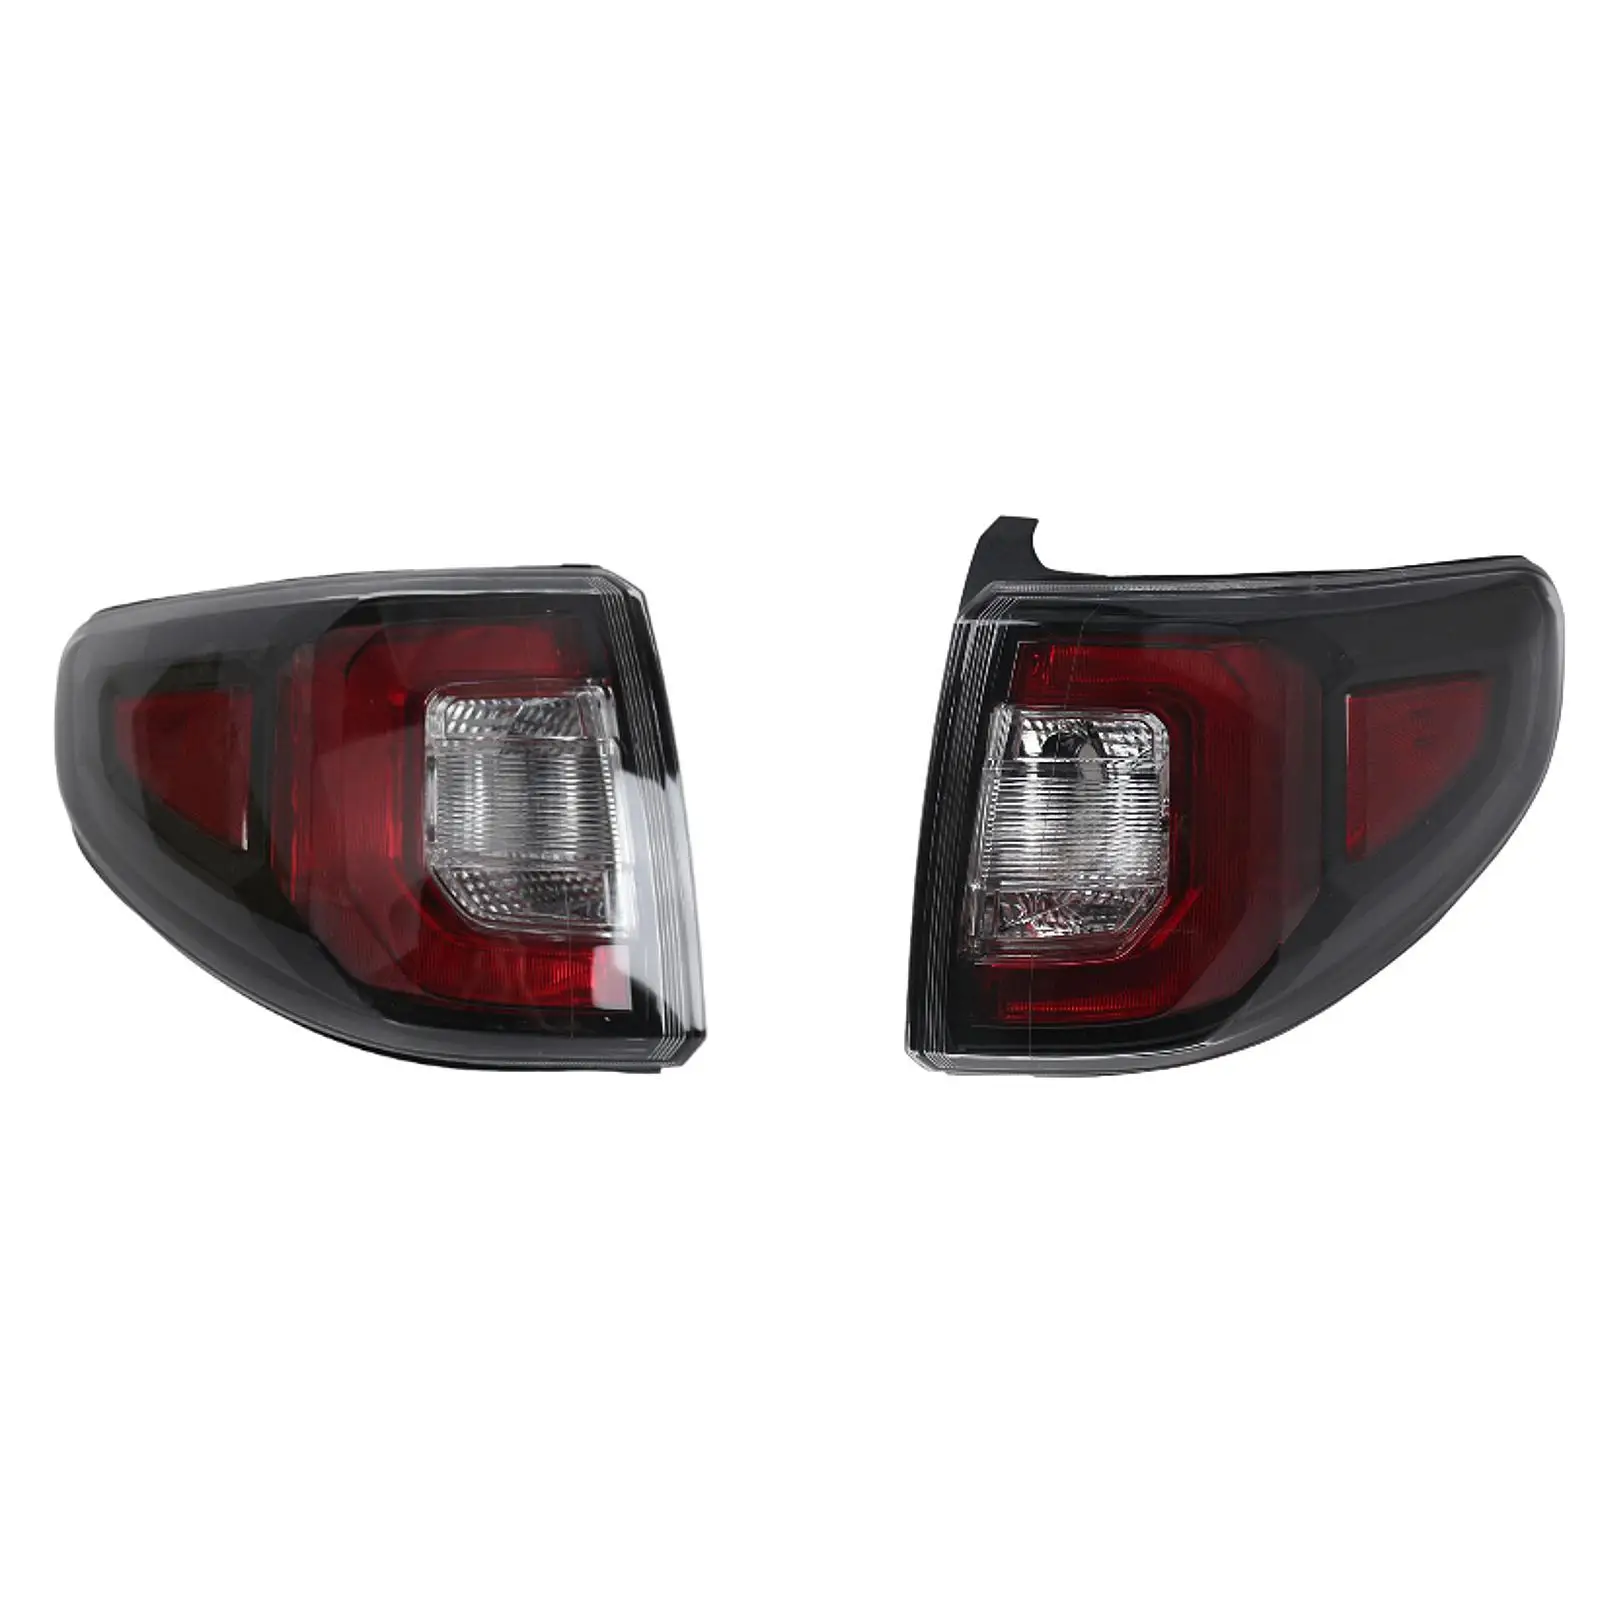 

LED Tail Light Sturdy Night Warning Lights for GMC Acadia Limited 2017